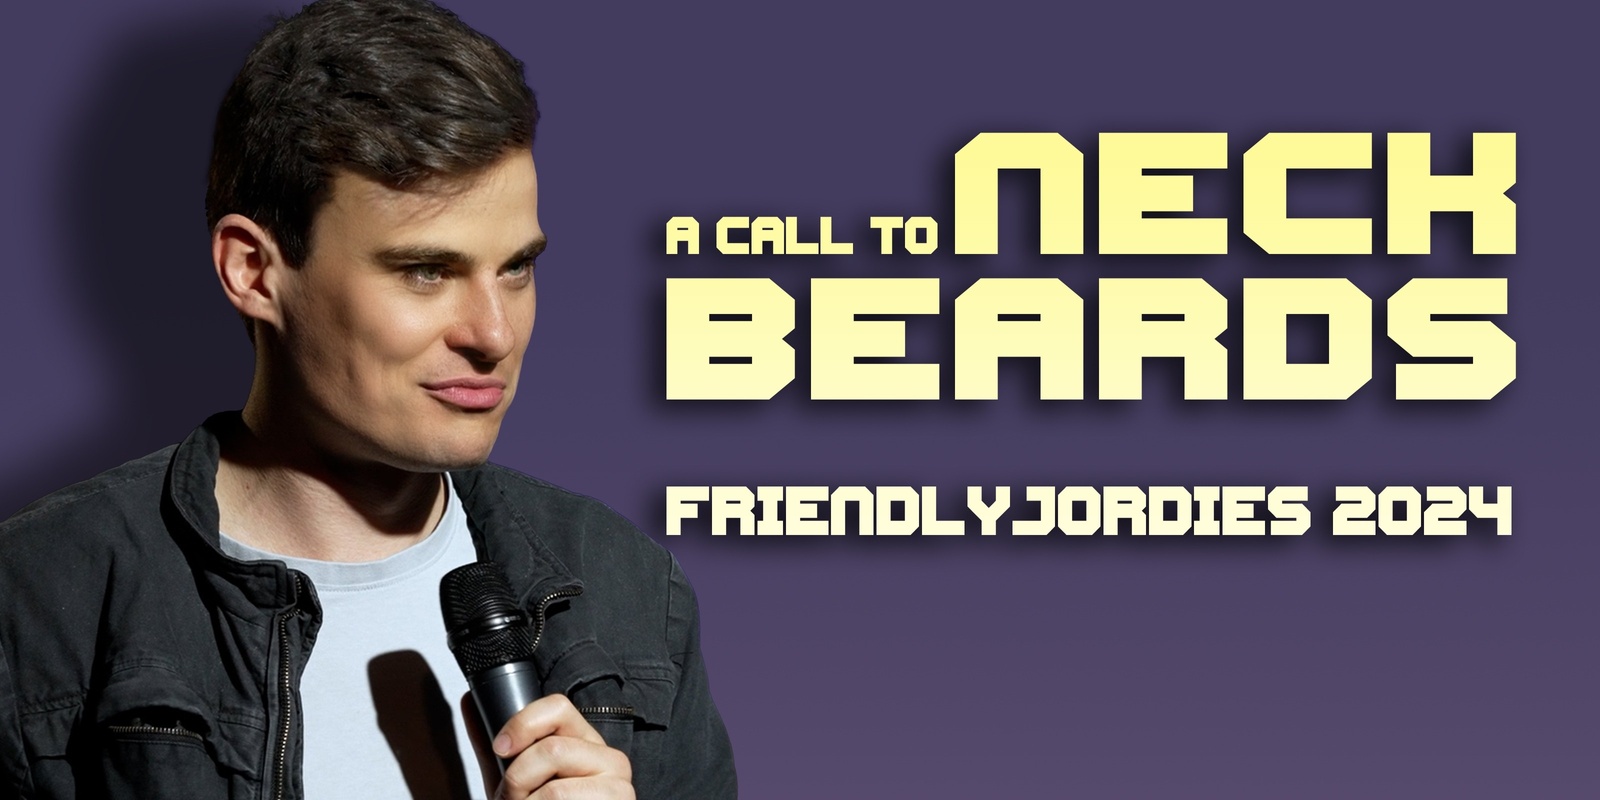 Banner image for Sydney - Friendlyjordies Presents: A Call to Neck Beards